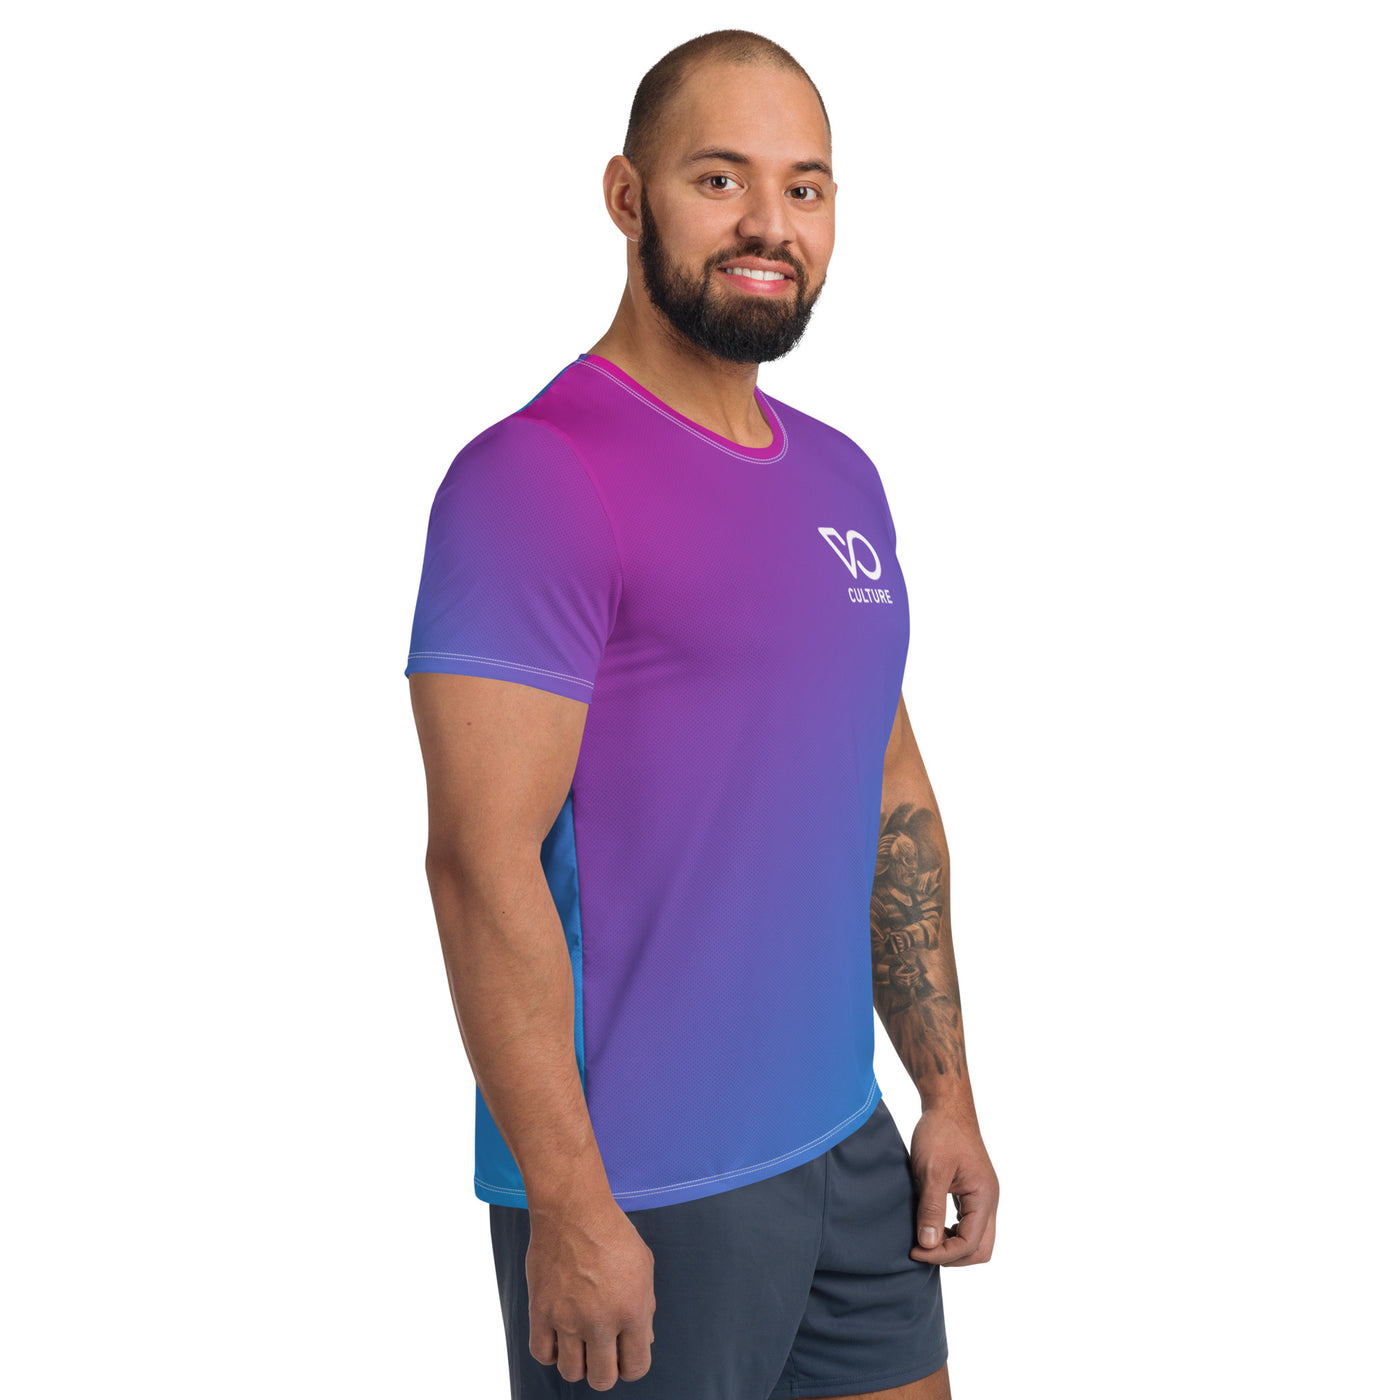 WORK YOUR PLAN Male Athletic T-shirt